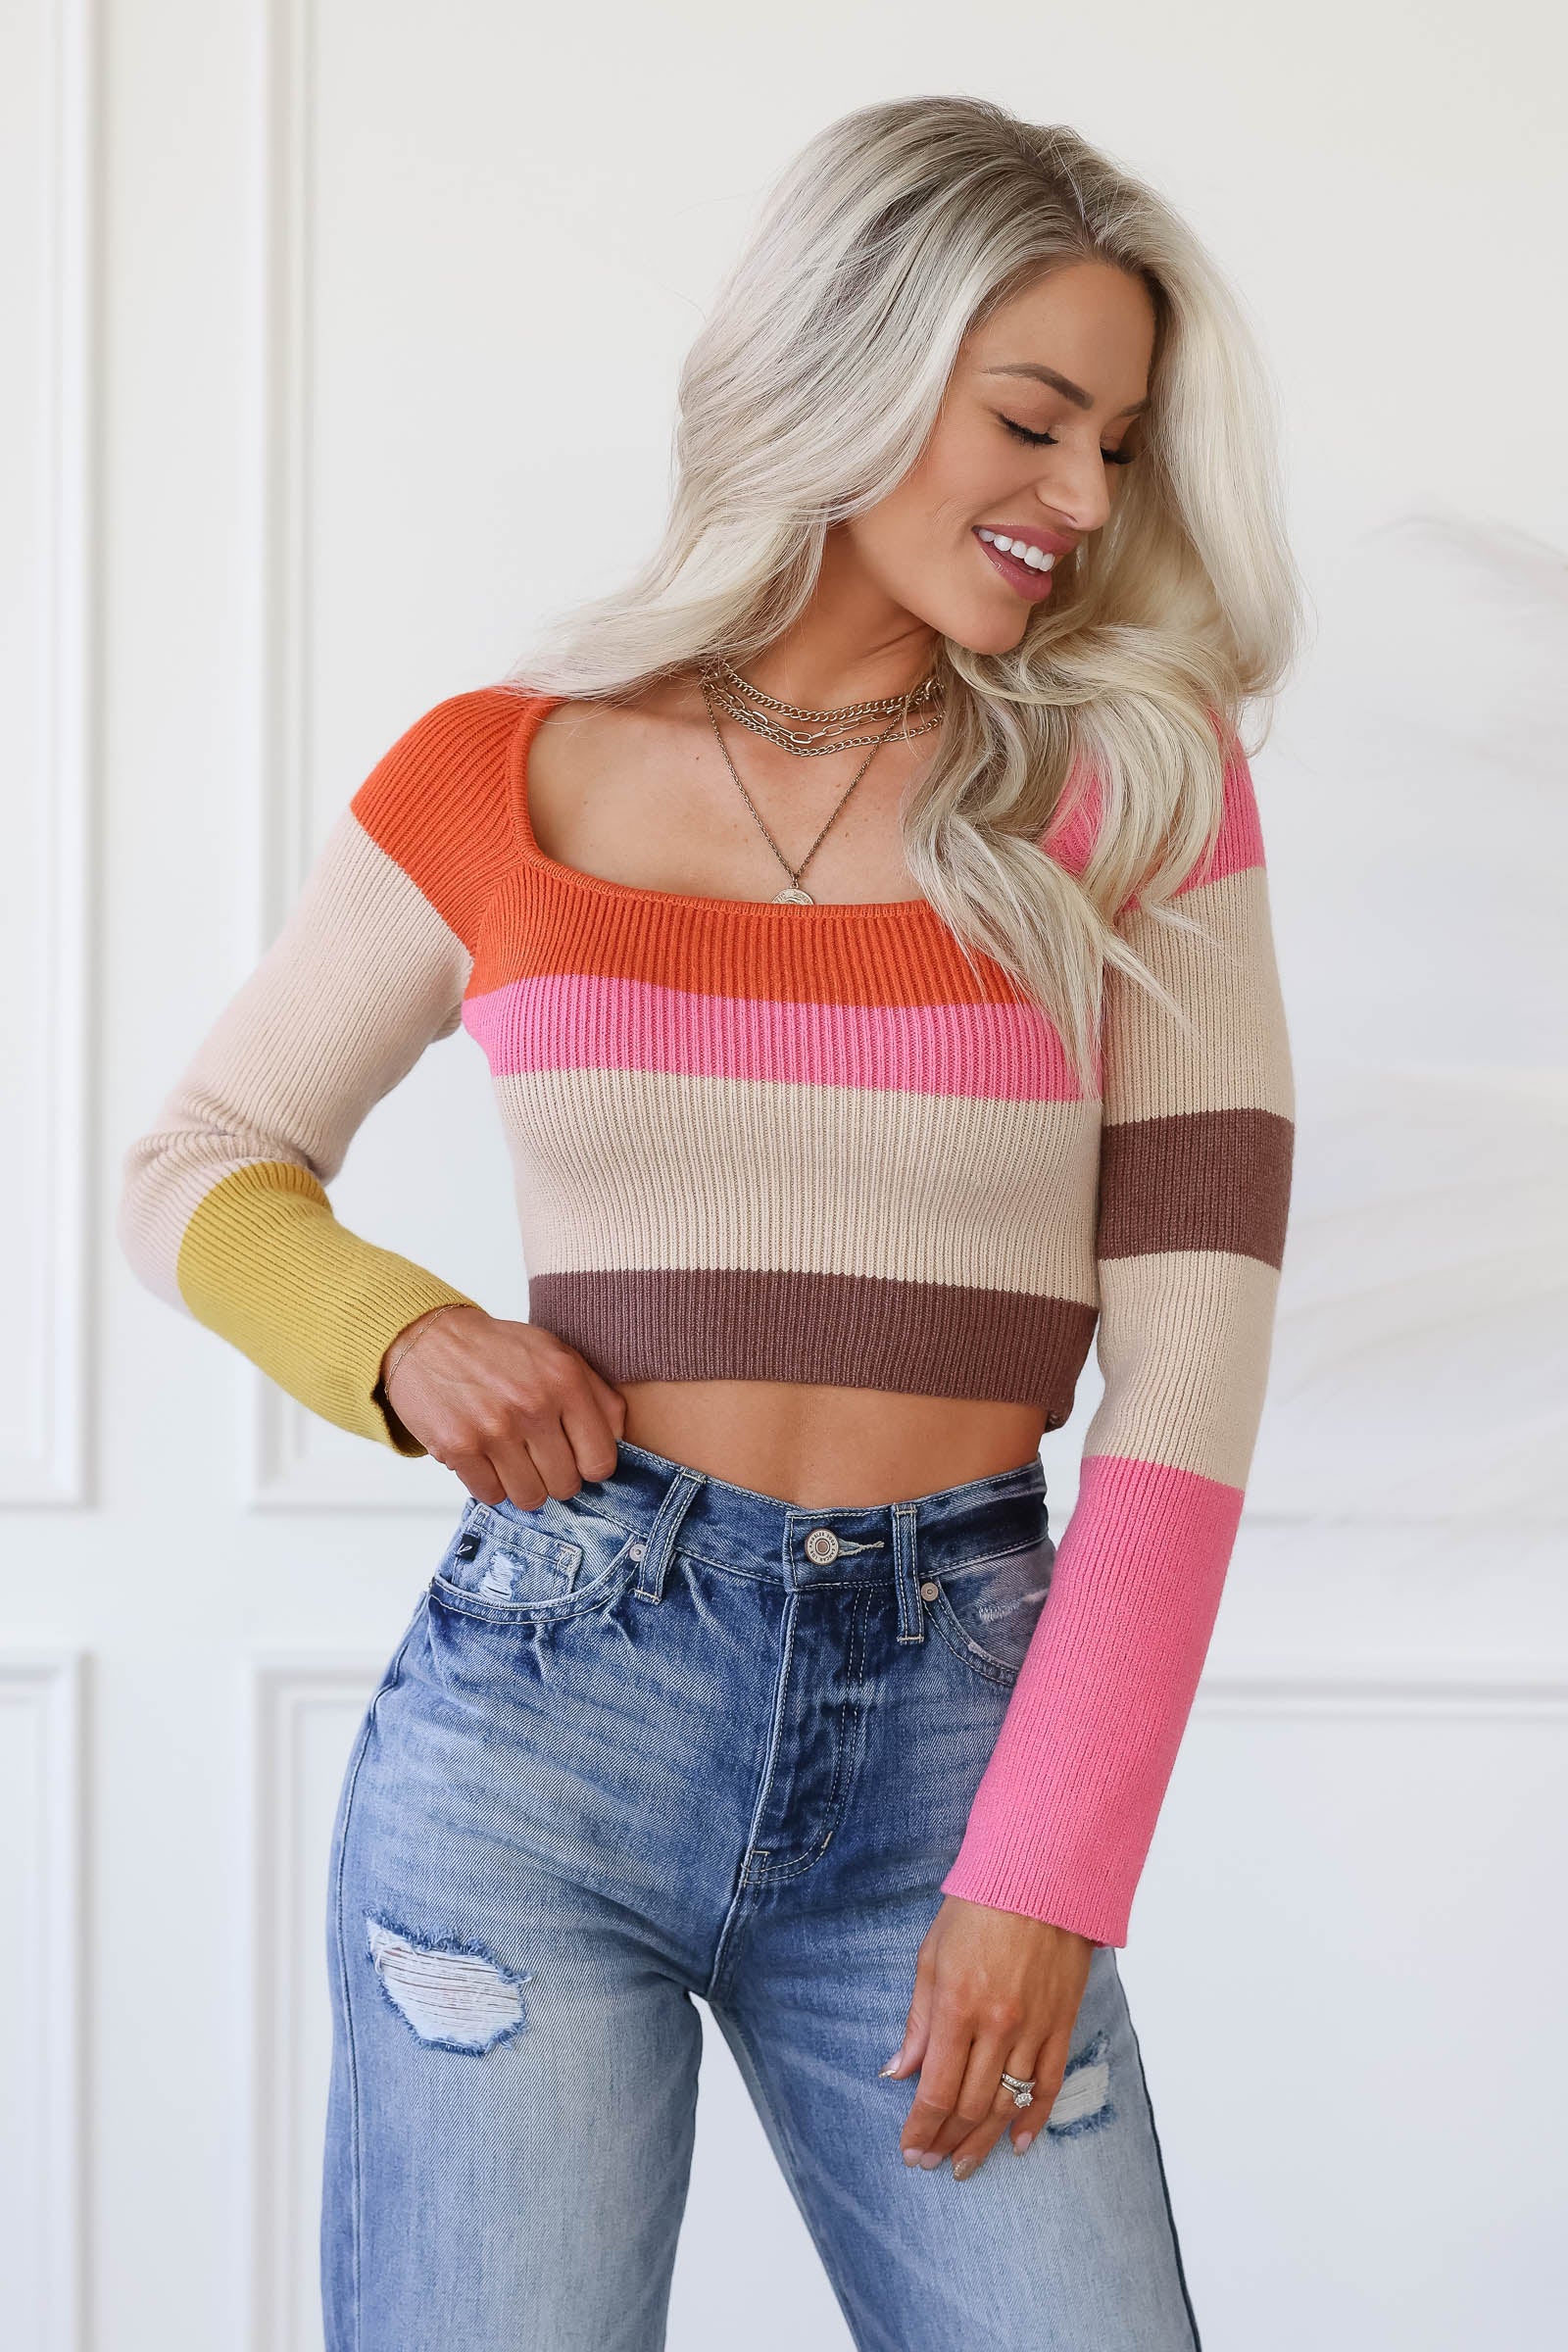 You Must Be New Color Block Top, Closet Candy, 1